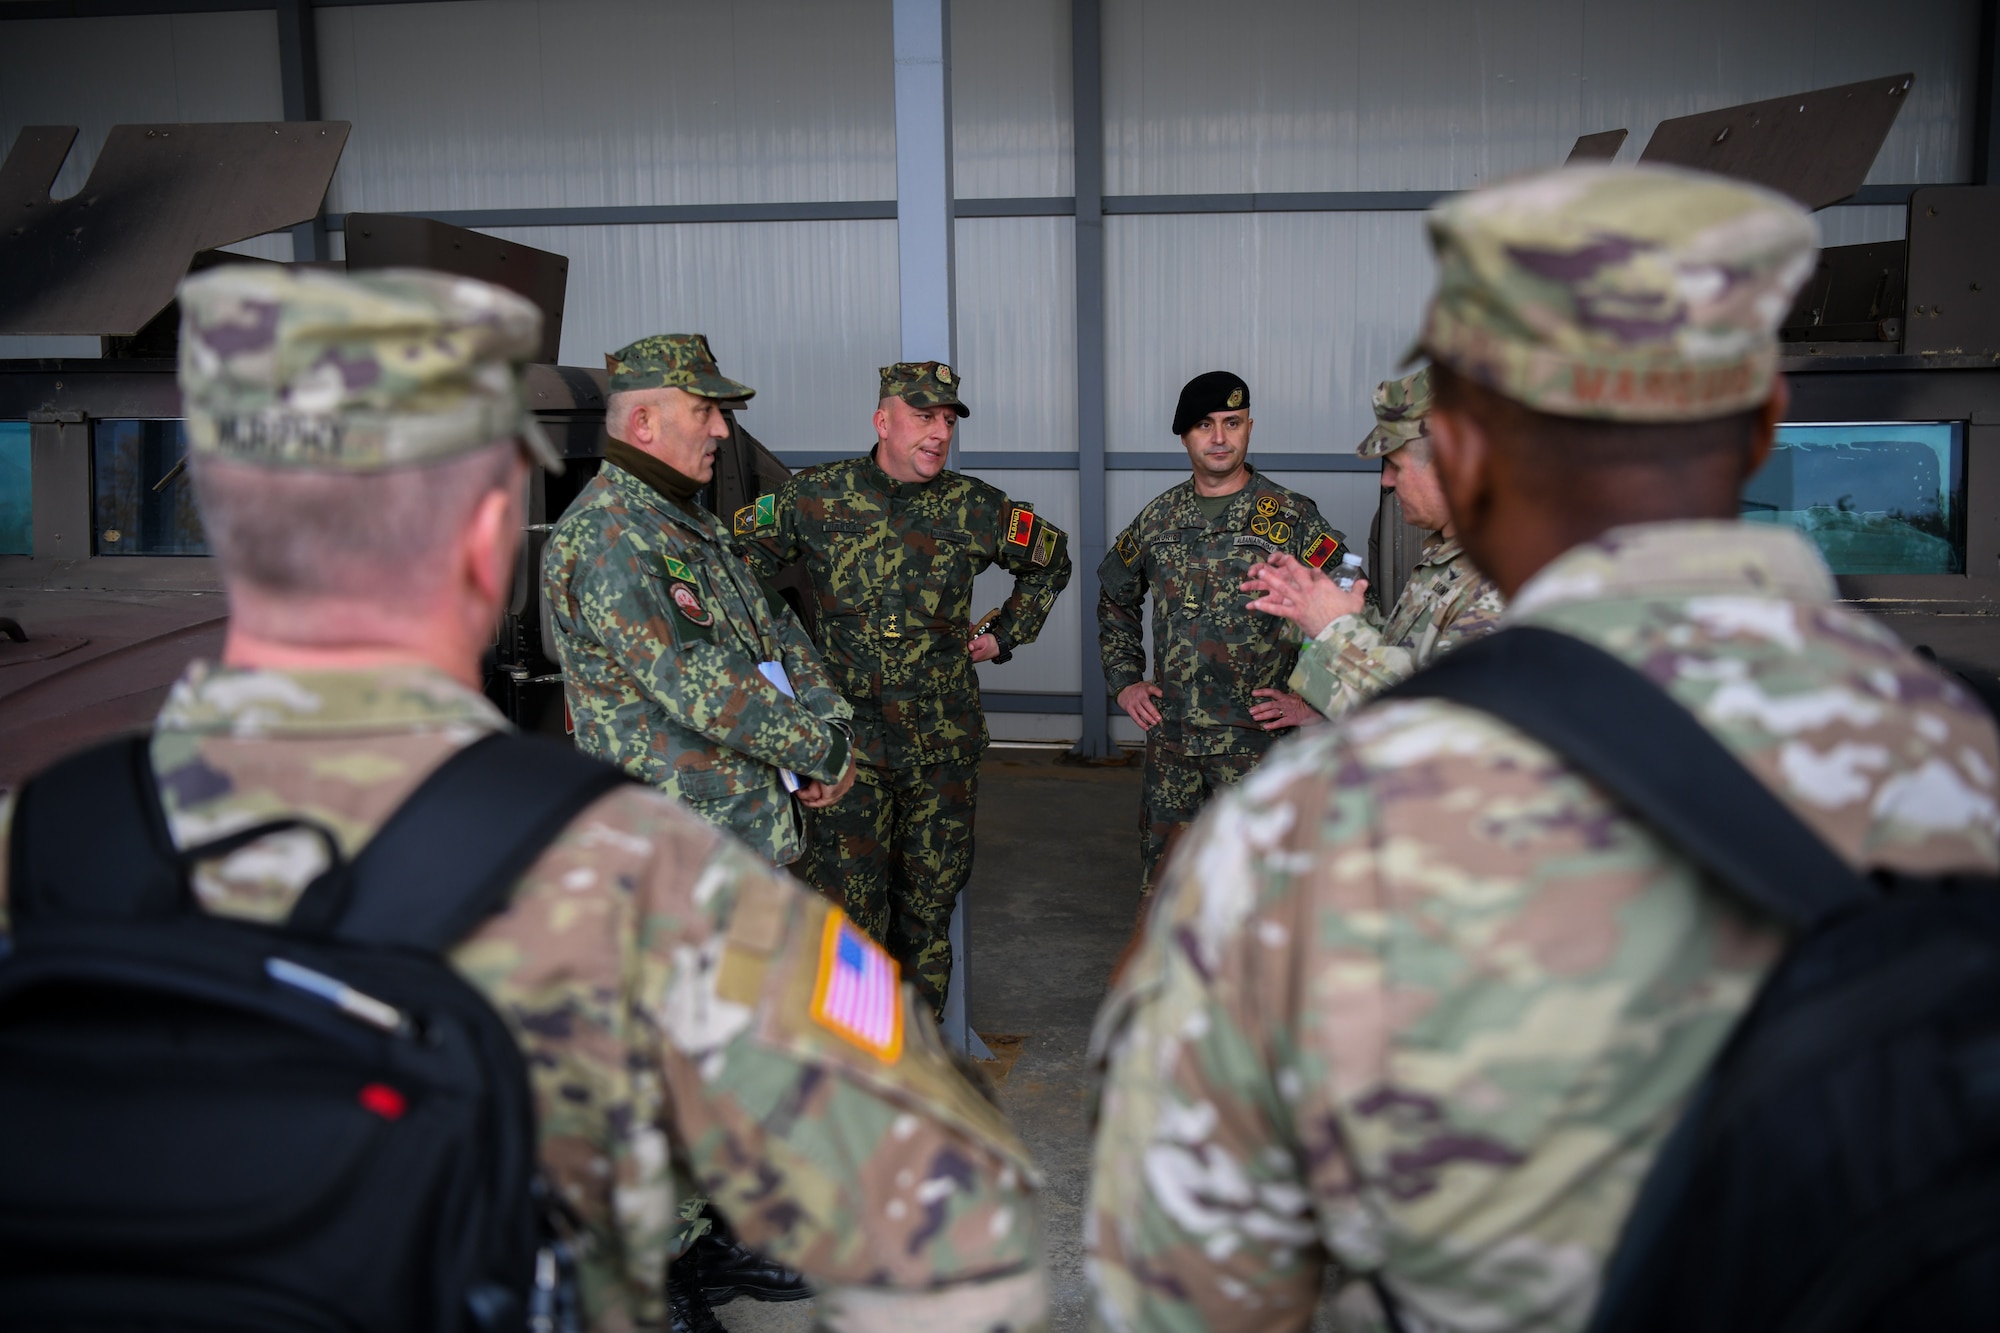 U.S. Army Capt. Jose Couselo addressing Albanian Armed Forces staff at Land Forces Headquarters, Zall-Herr, Tirana, Albania.